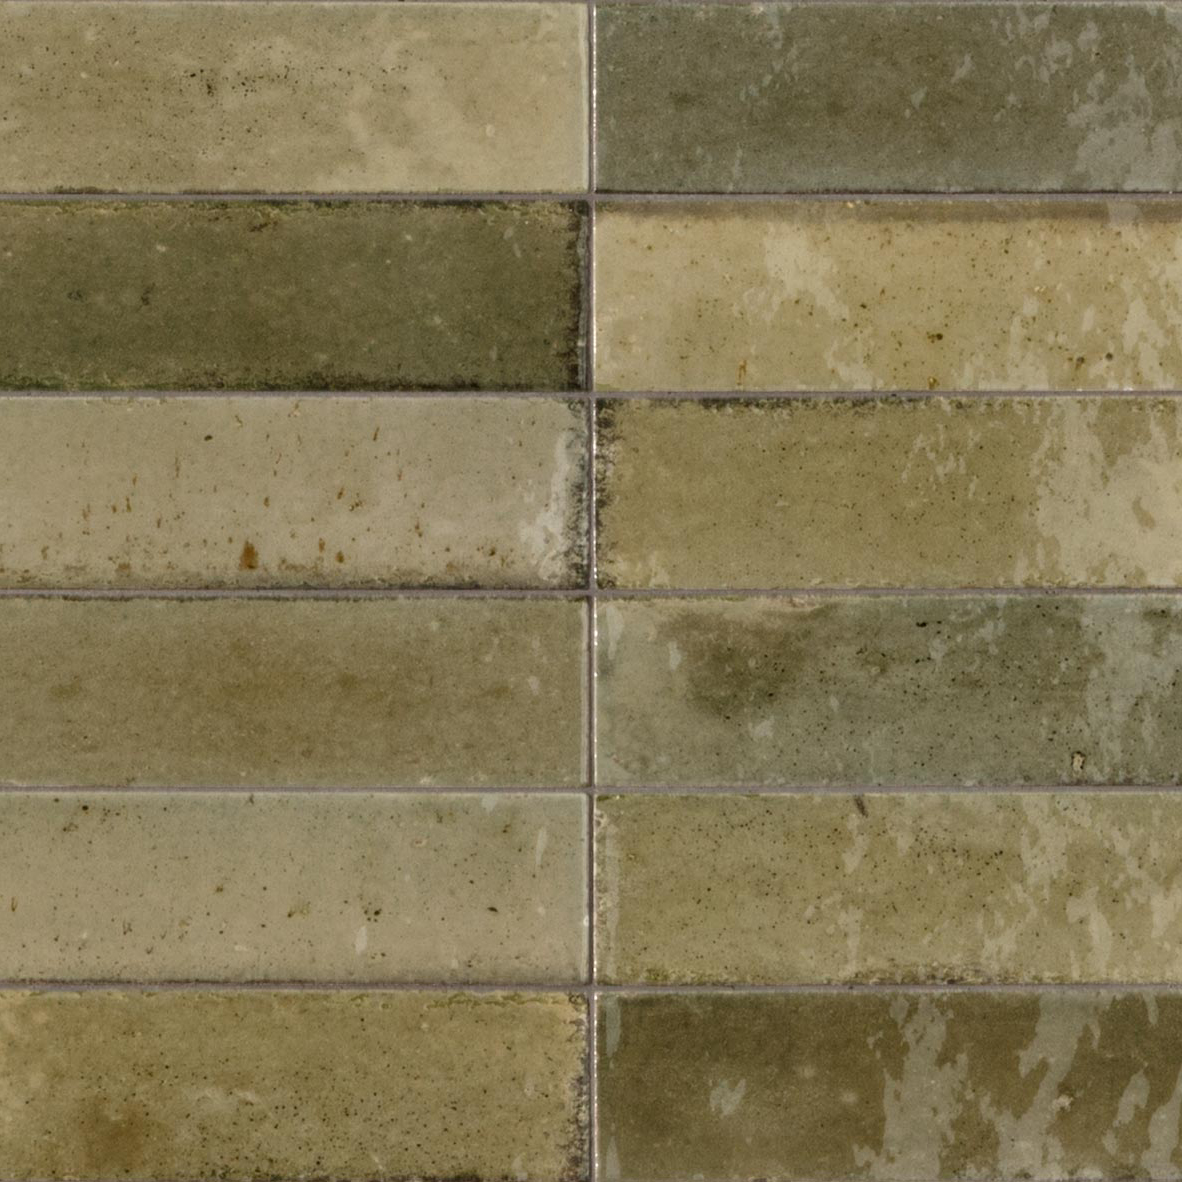 Marazzi Lume - Musk (Please call us on 0161 941 4143 to check stock availability and price before purchasing)